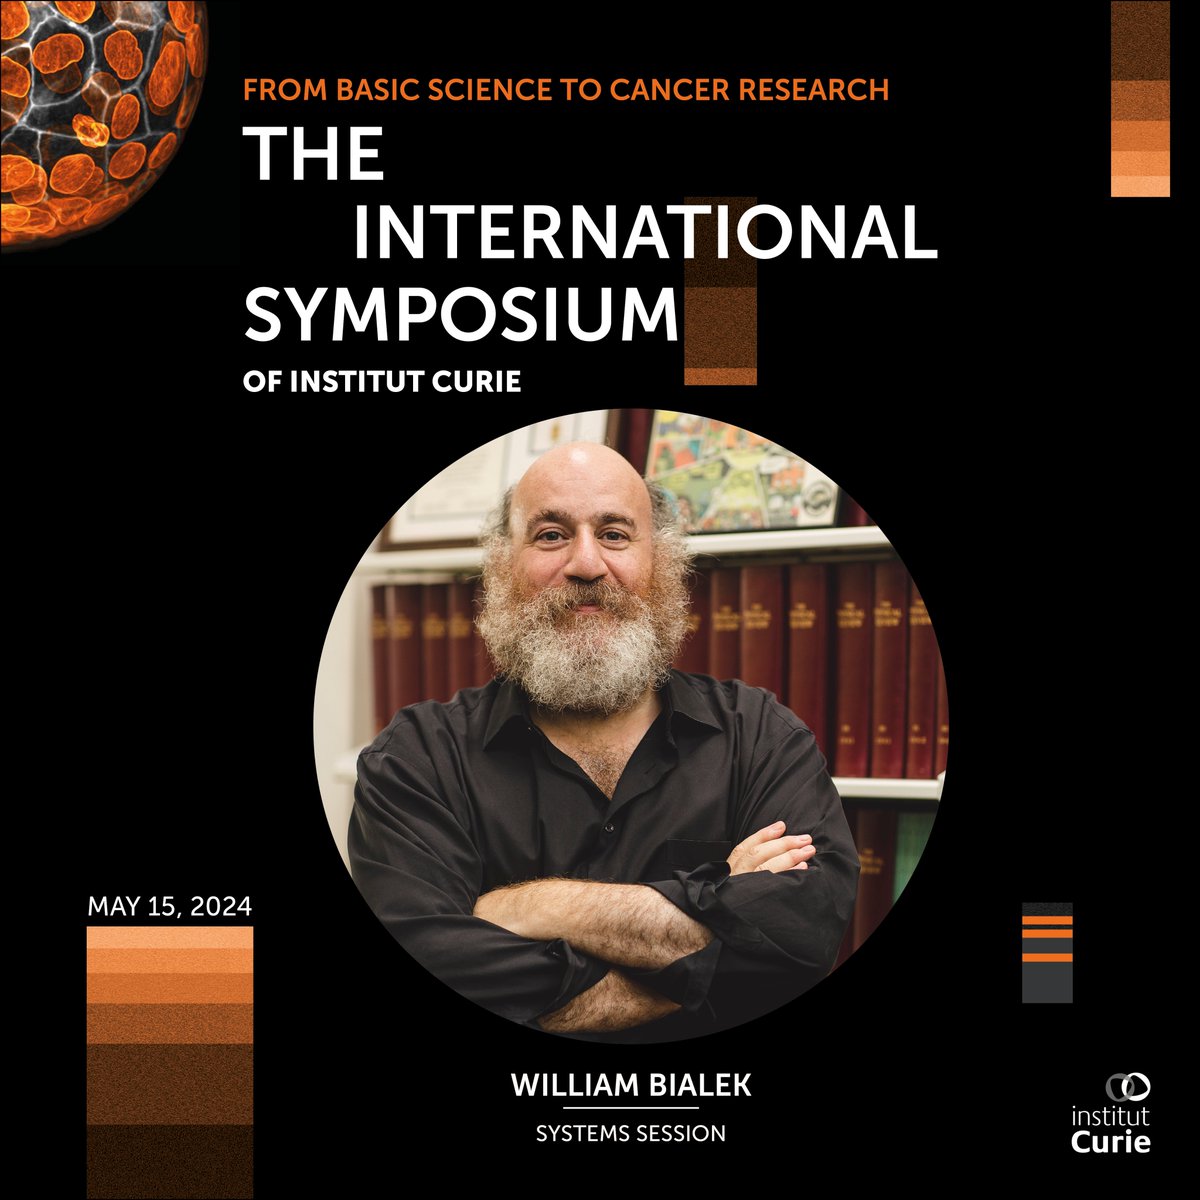 📅 In May 2024, join us for the 1st International Symposium of @institut_curie and meet exceptional speakers such as @wbialek, physician and prof. in Physics at @Princeton, keynote speaker of the Systems Session. 

Discover more on: curiesymposium.fr

#CurieSymposium